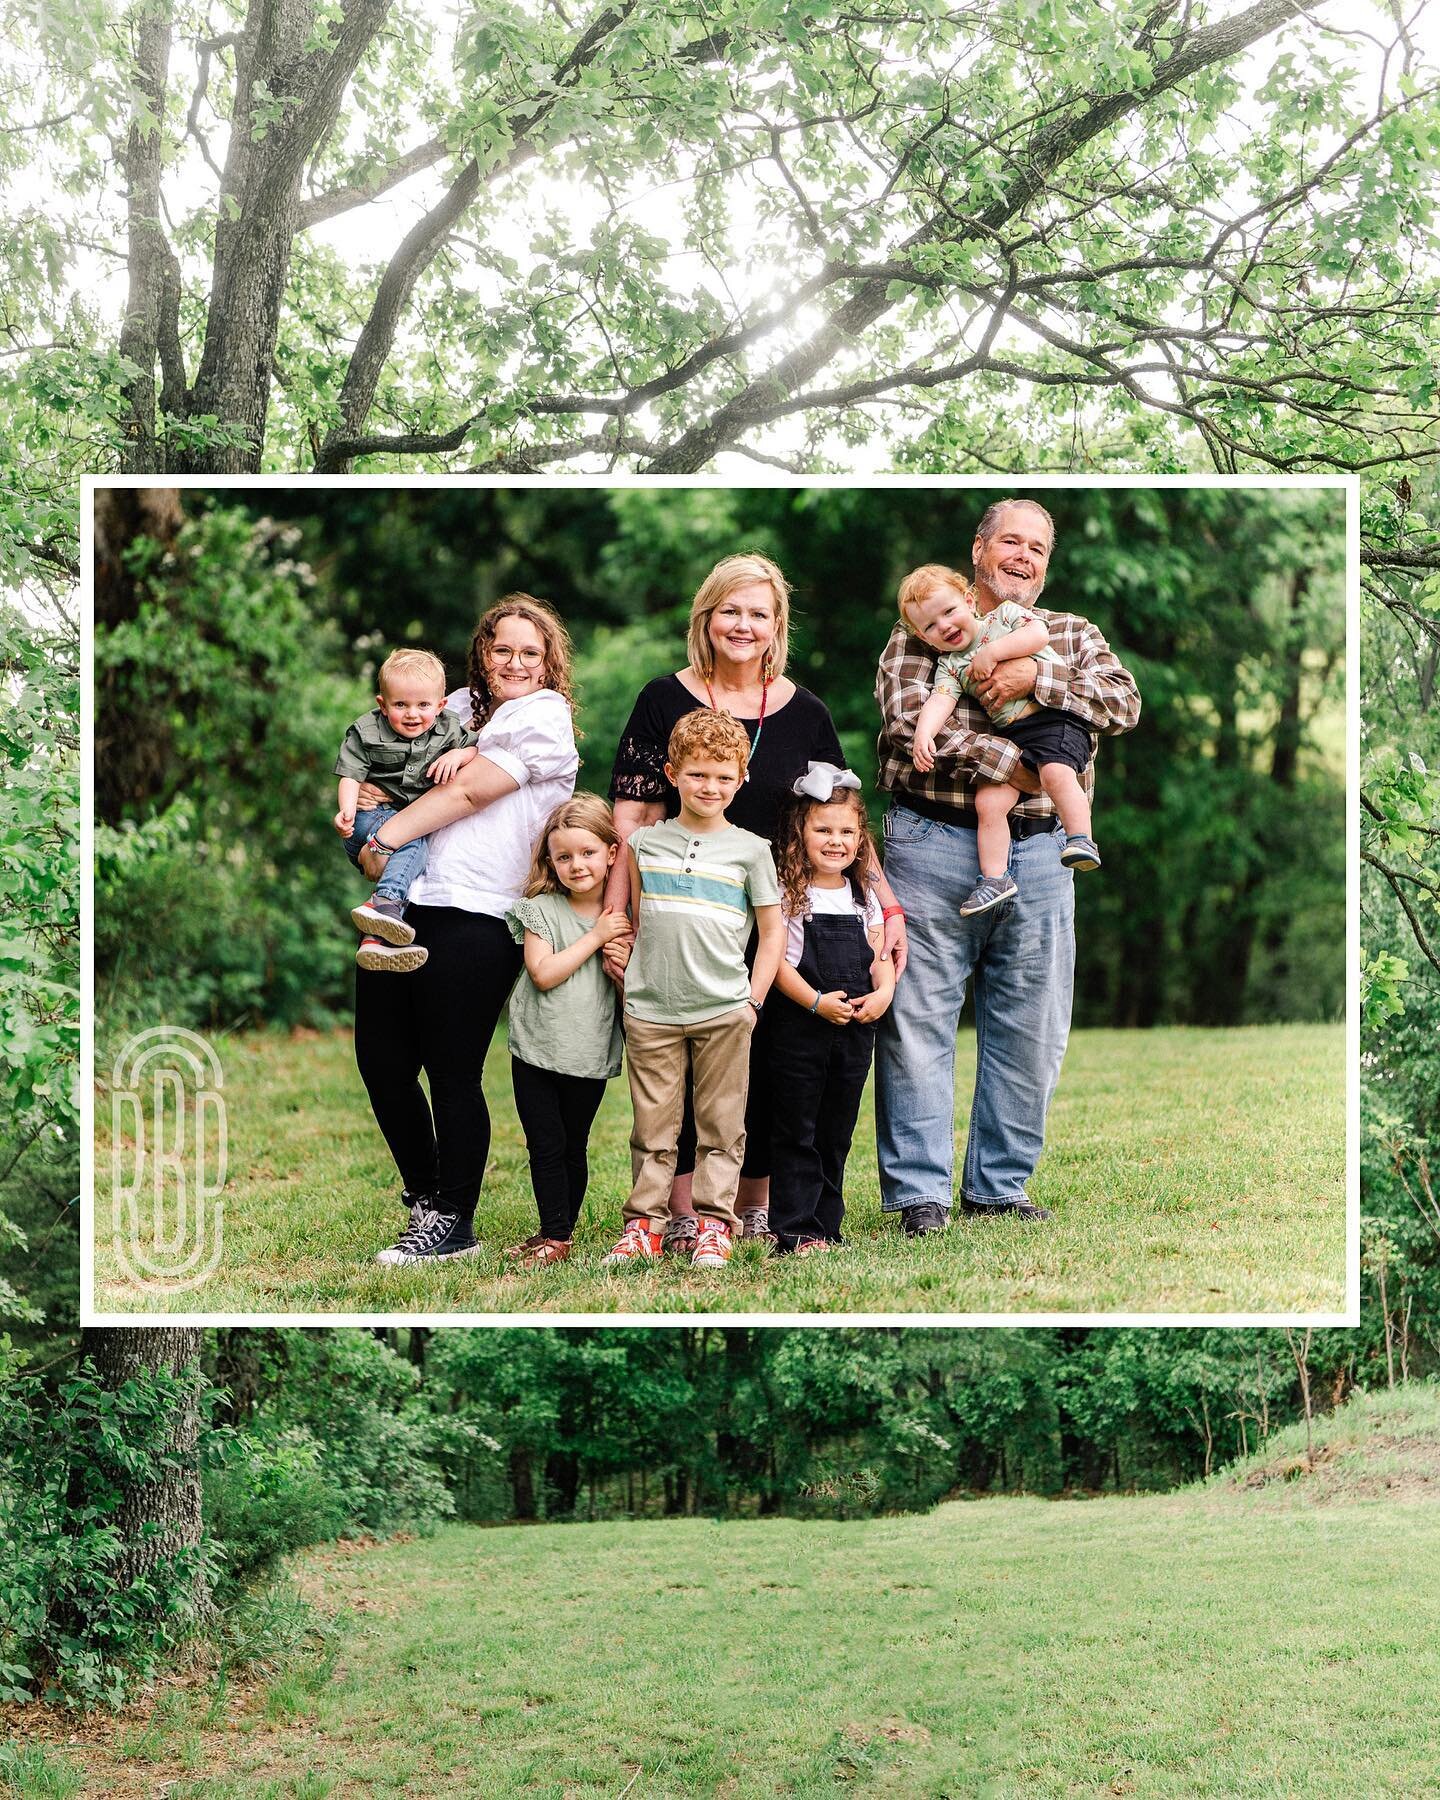 Grands and grandkids ✨ What a joy to capture this extended family session last week ☺️☺️☺️

#familyportraits #familyphotography #documentyourdays #nwaphotographer #bentonvillephotographer #arkansasphotographer #nwarkansas #bentonvillearkansas #sonyal